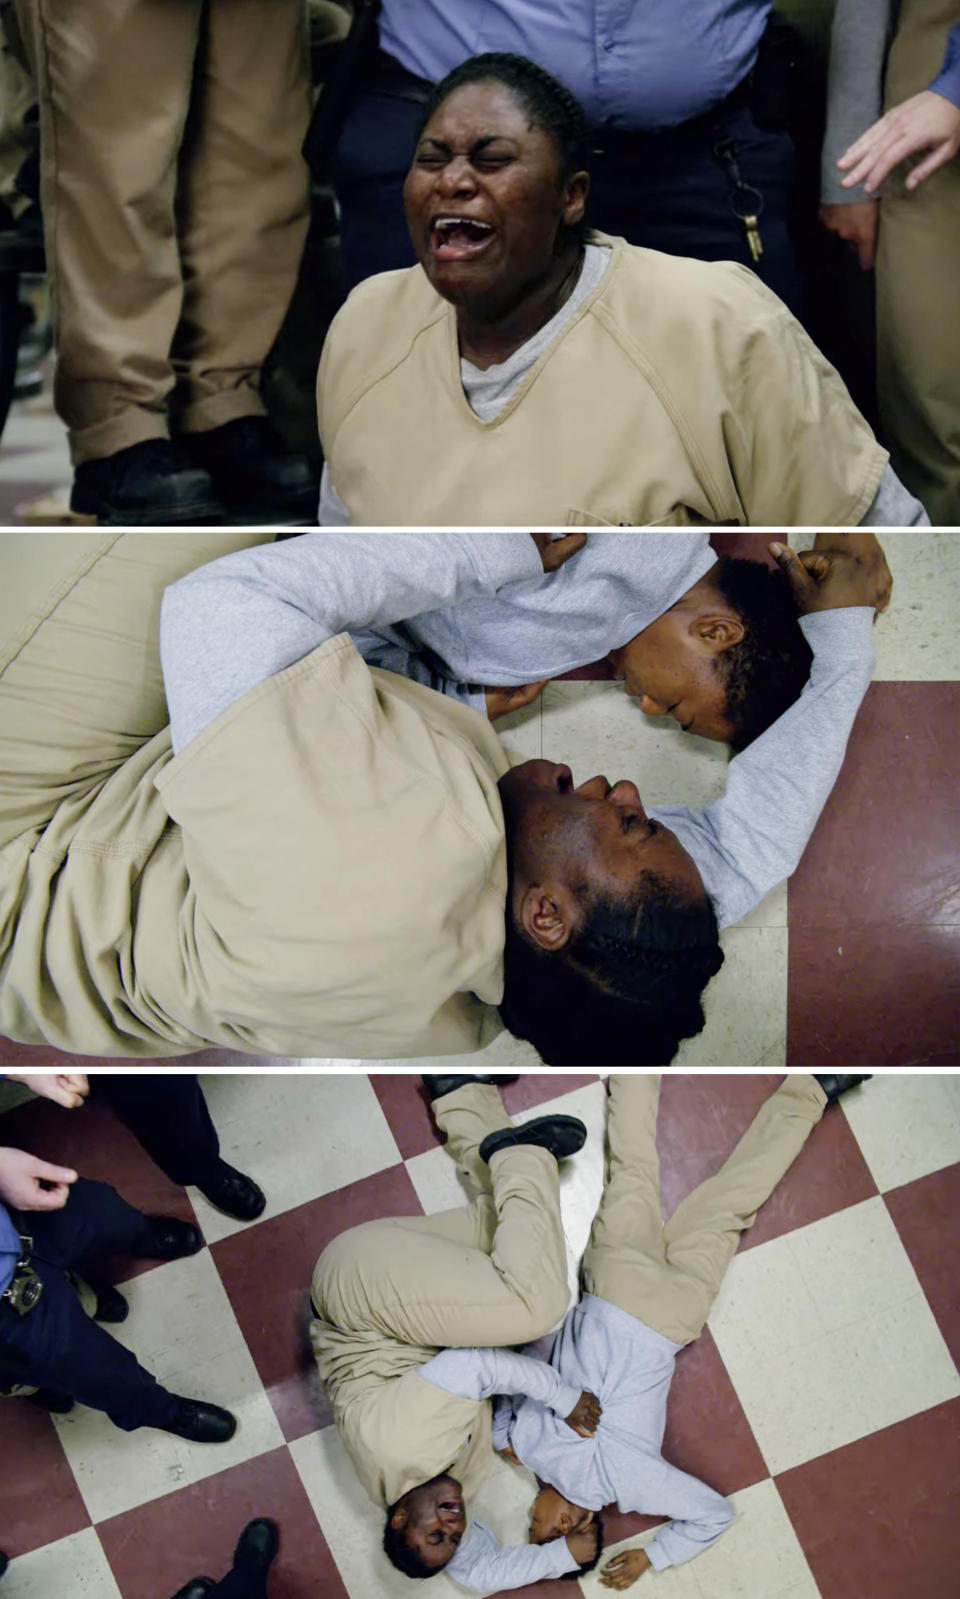 Poussey from "Orange Is the New Black" on the floor dying